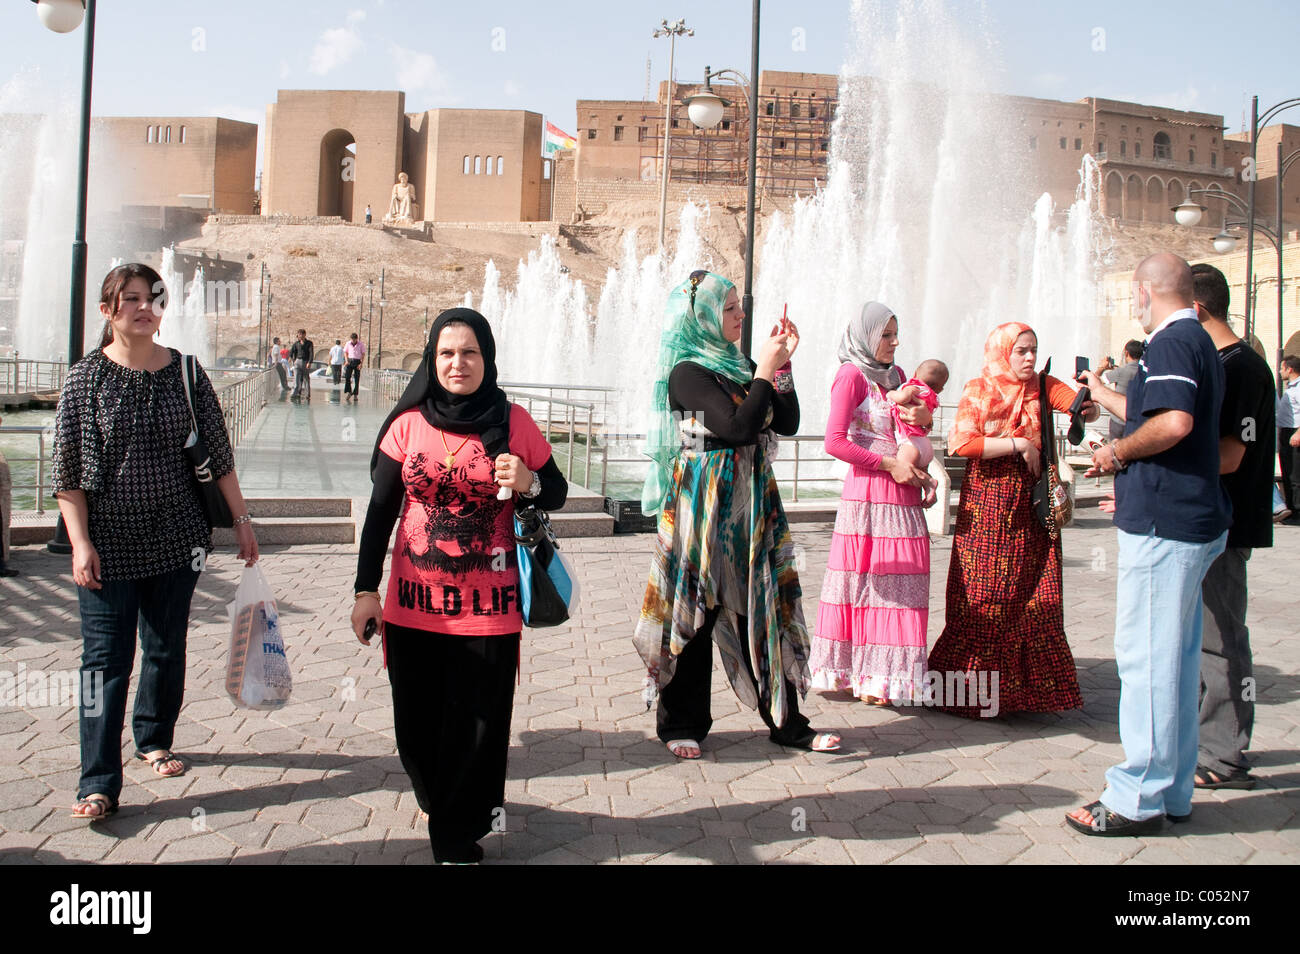 A group of Kurdish people socializing in the main public square, below the old city walls and citadel, in the city of Erbil, Kurdistan, northern Iraq. Stock Photo